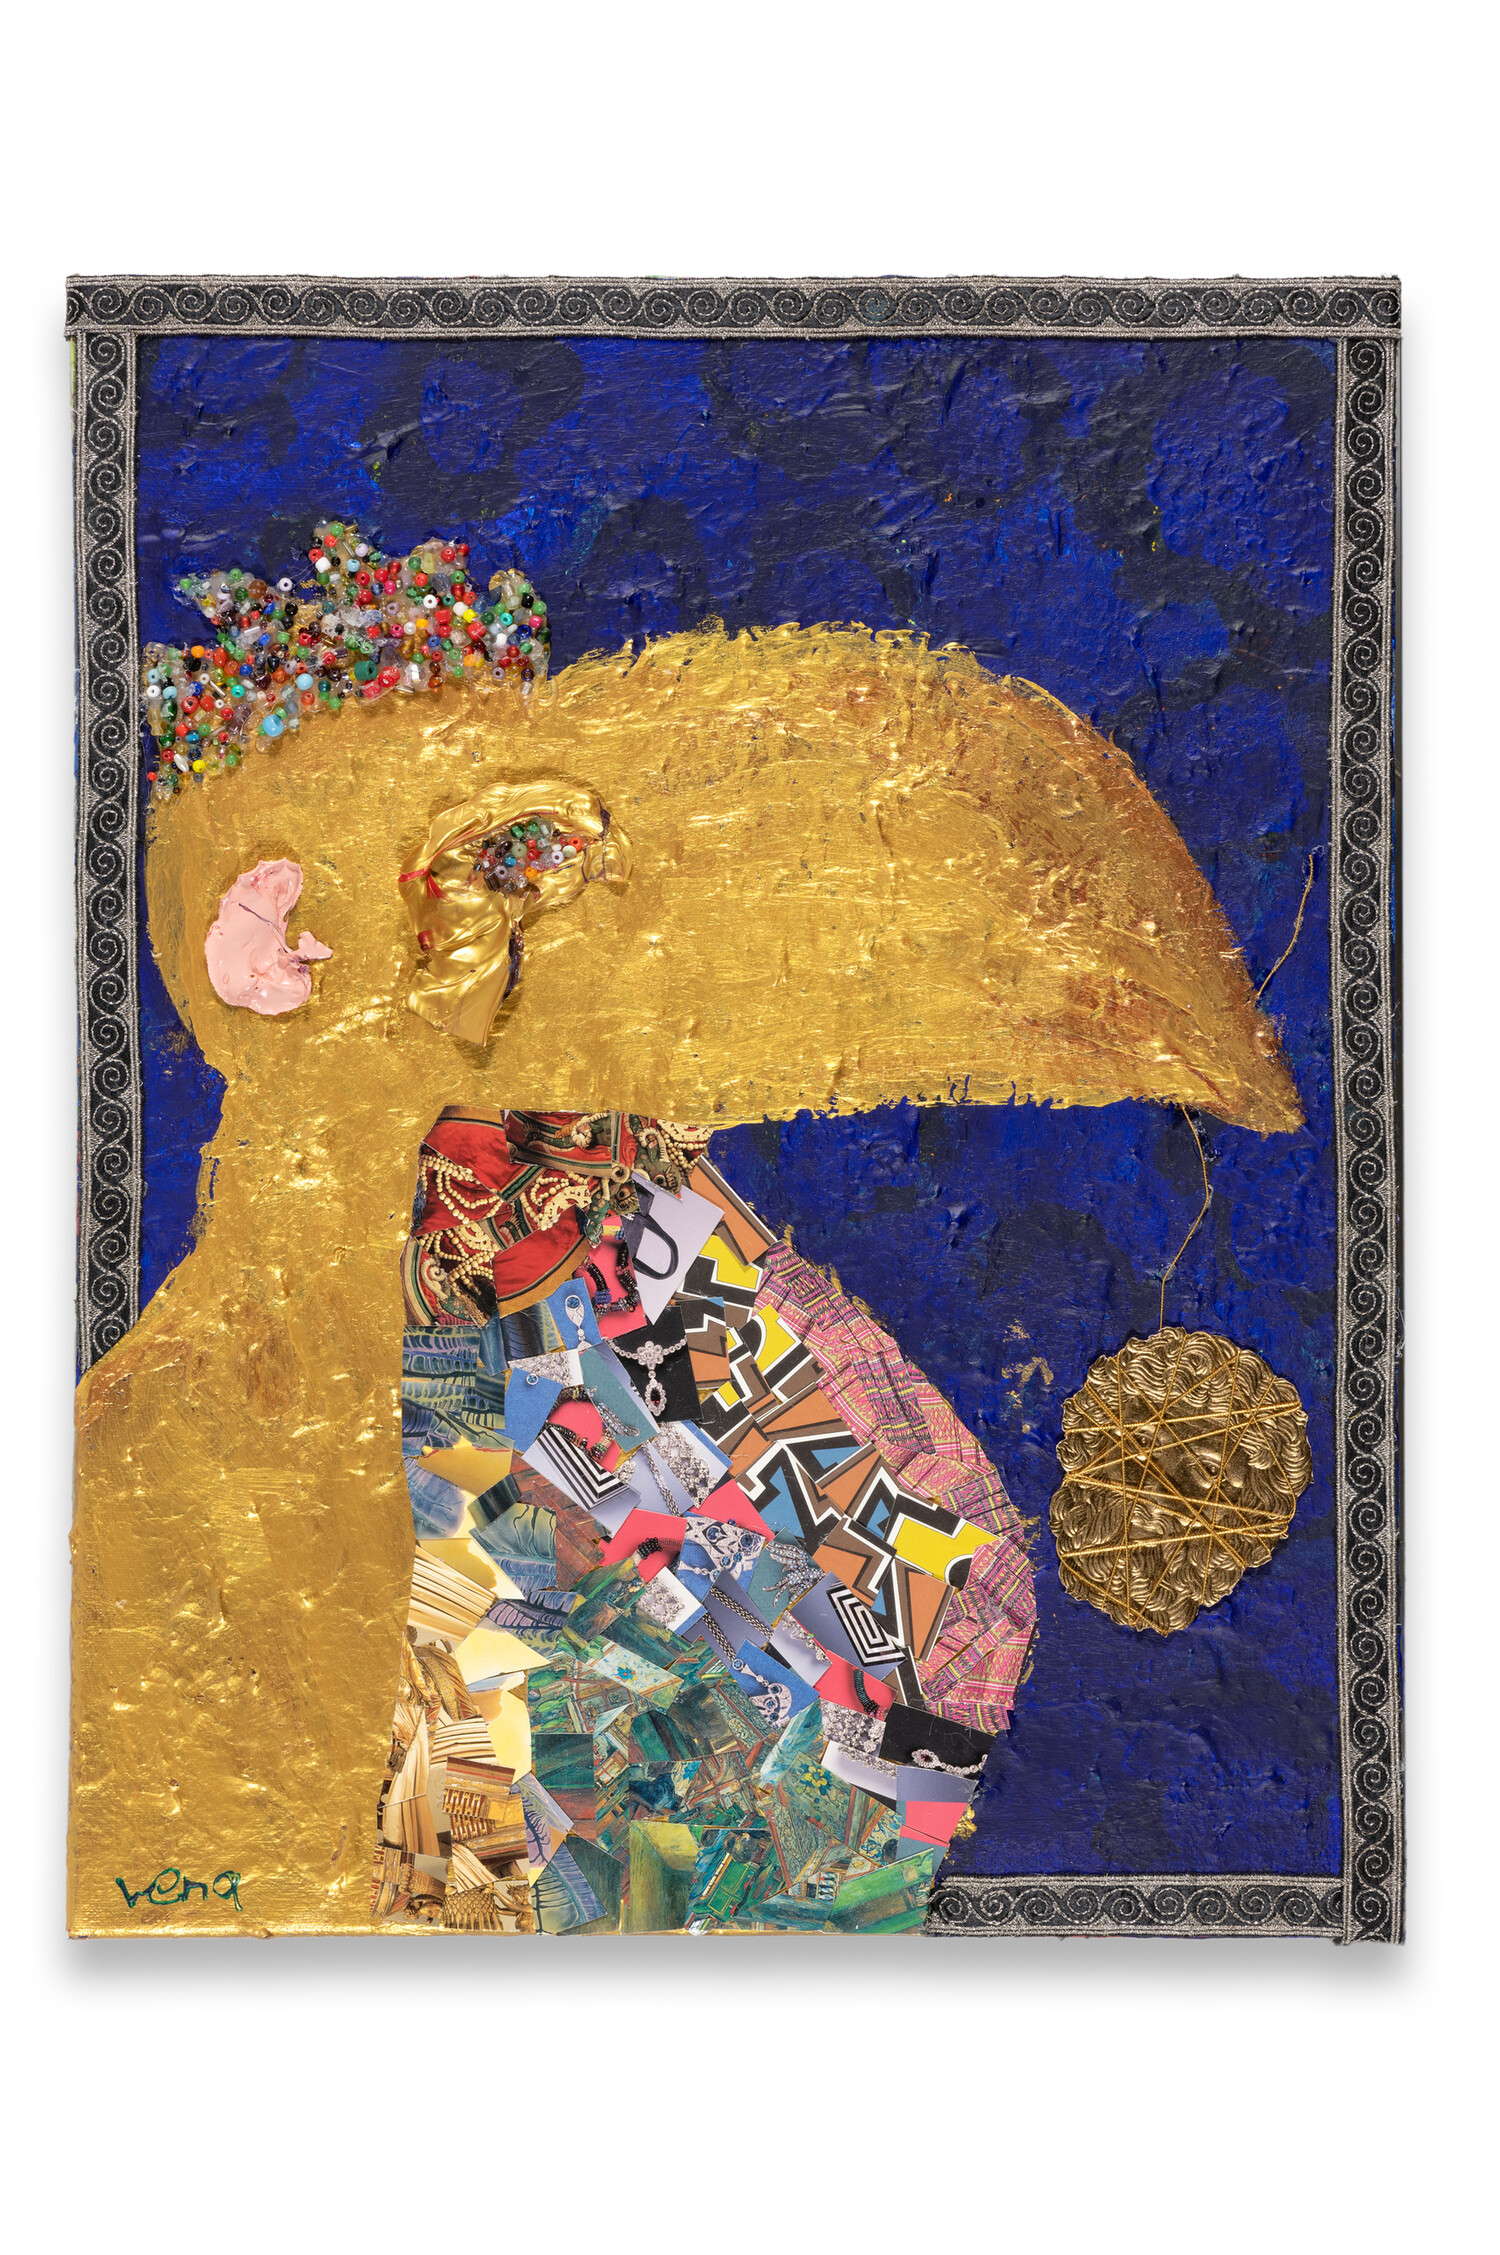 photo of His Majesty, made with promiment gold and dark blue paint and collage elements